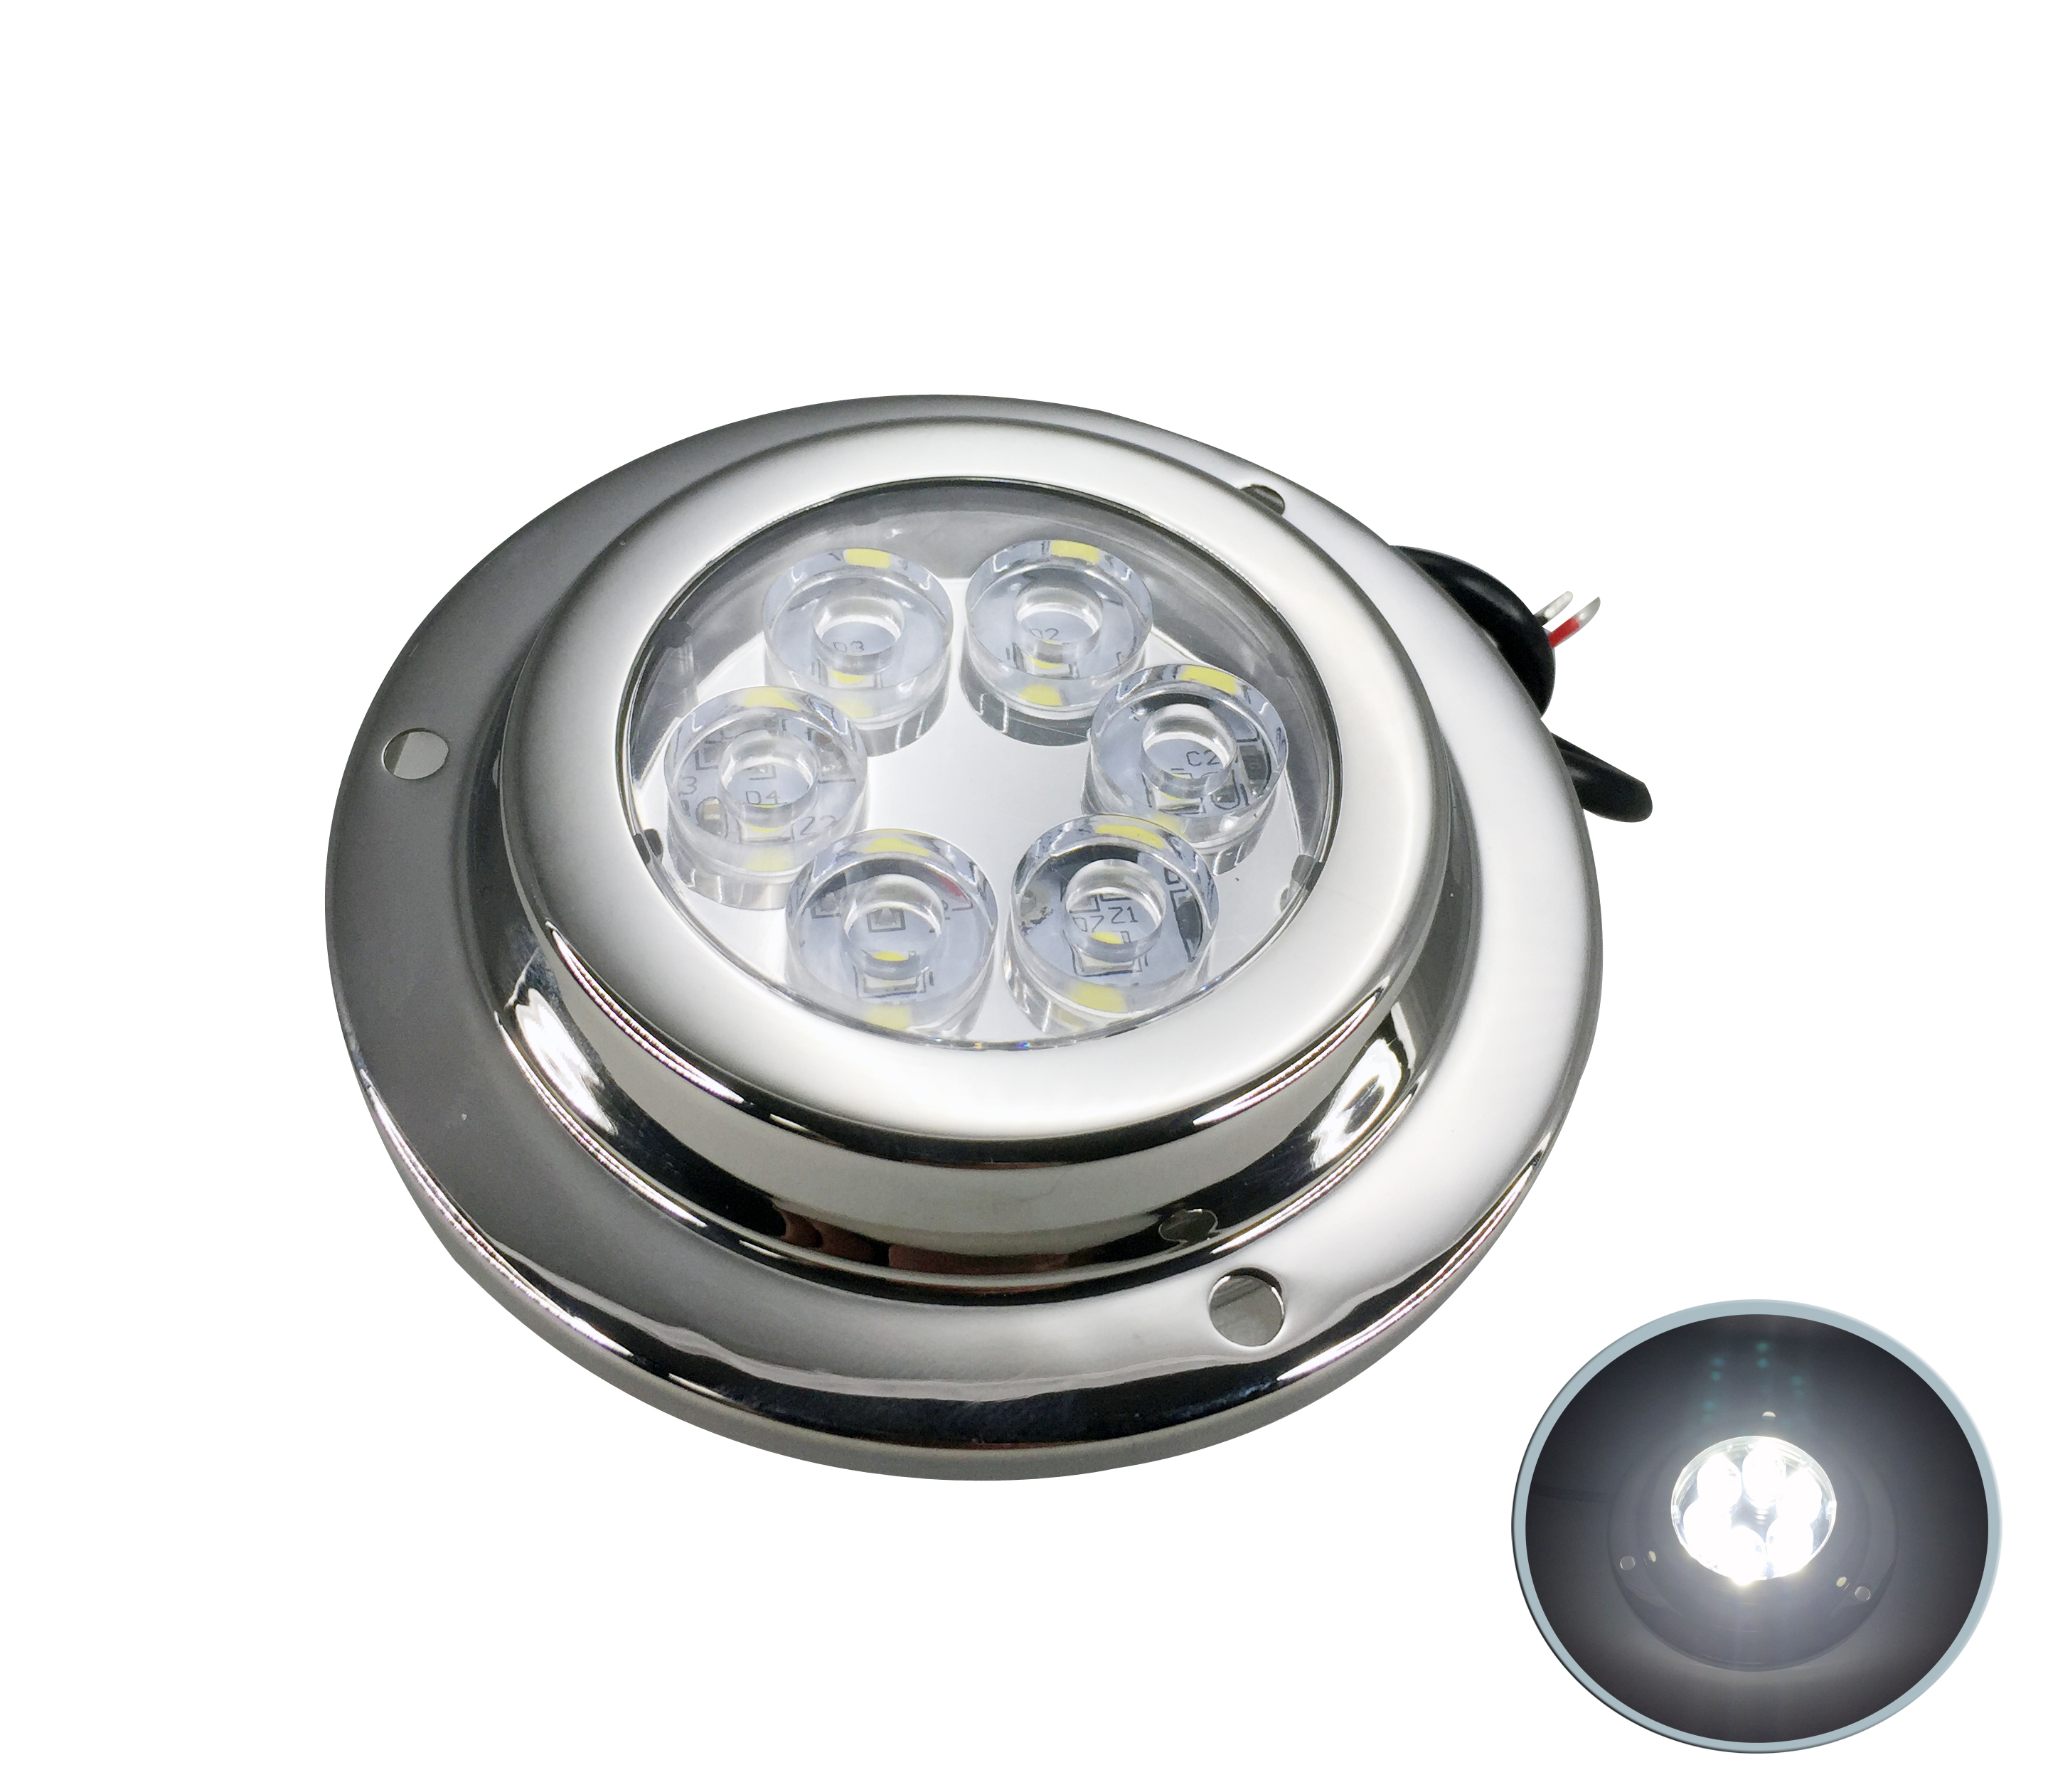 Pactrade Marine Boat SS316 LED White 6 x 2 W Underwater Light 10-30V IP 68 - image 1 of 5